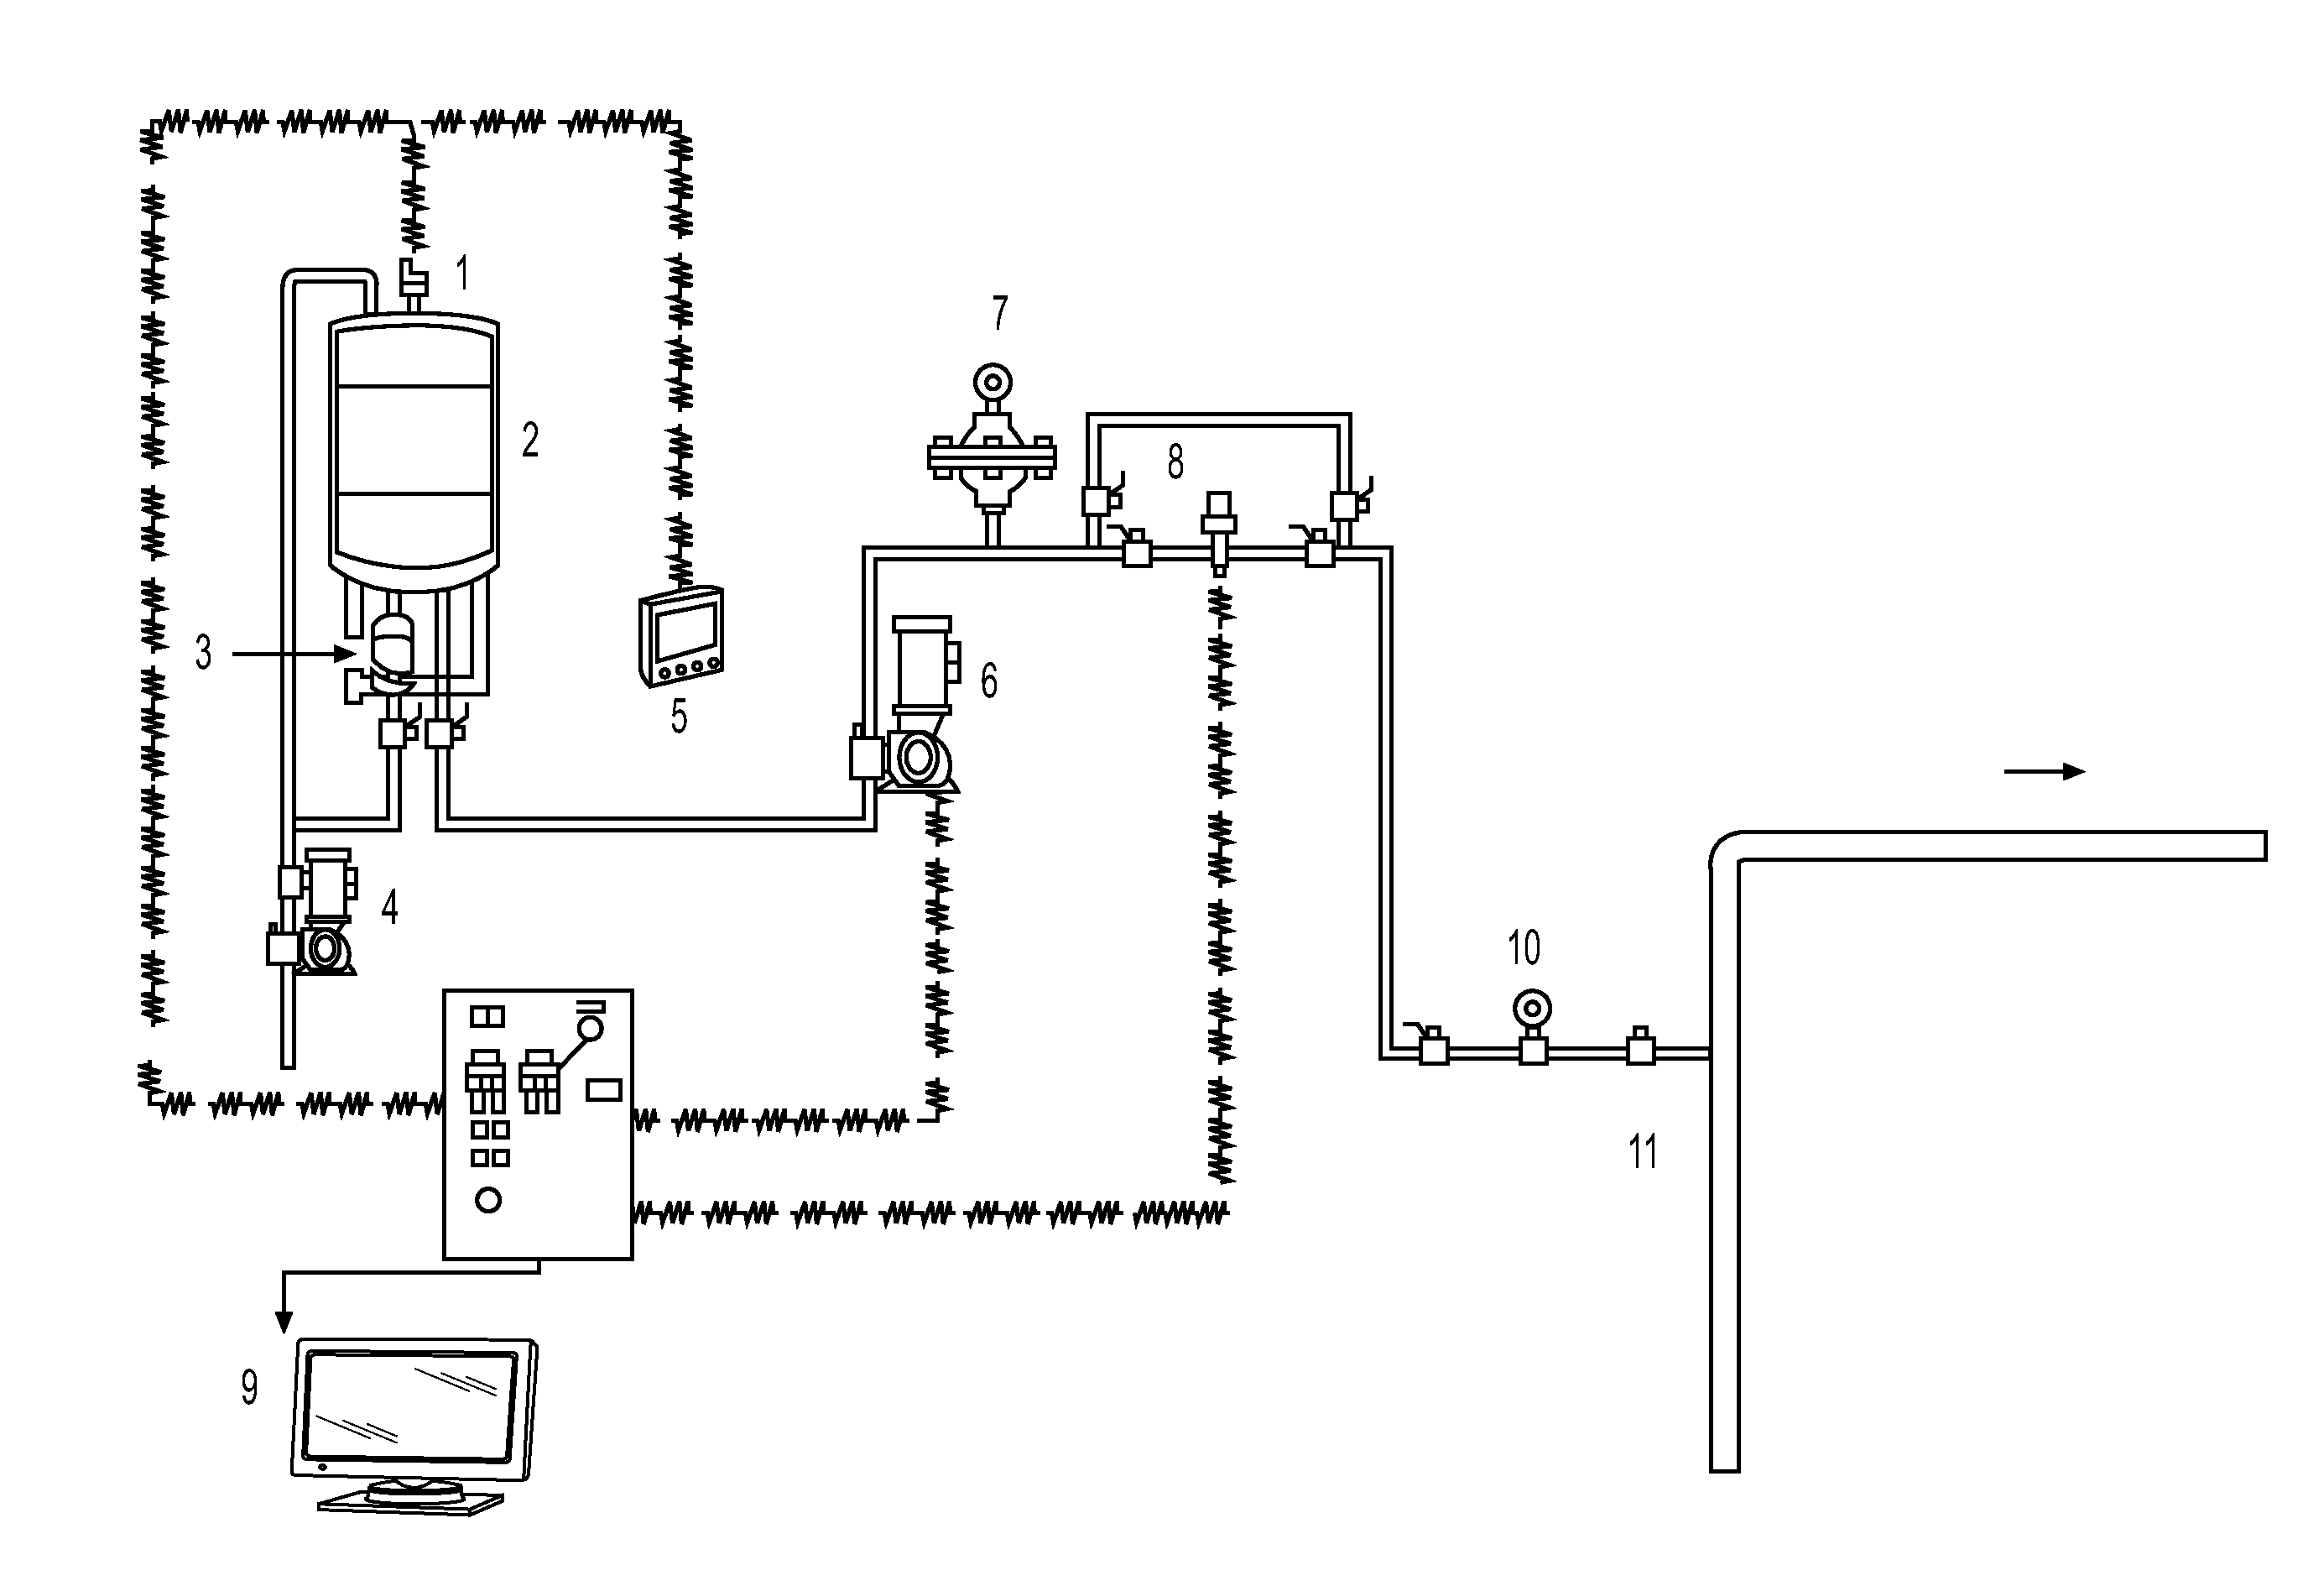 System for the dosing of additives/inhibitors containing magnesium oxide applied to fuels used for the production process of clinker/cement in rotary furnaces and steam generating boilers